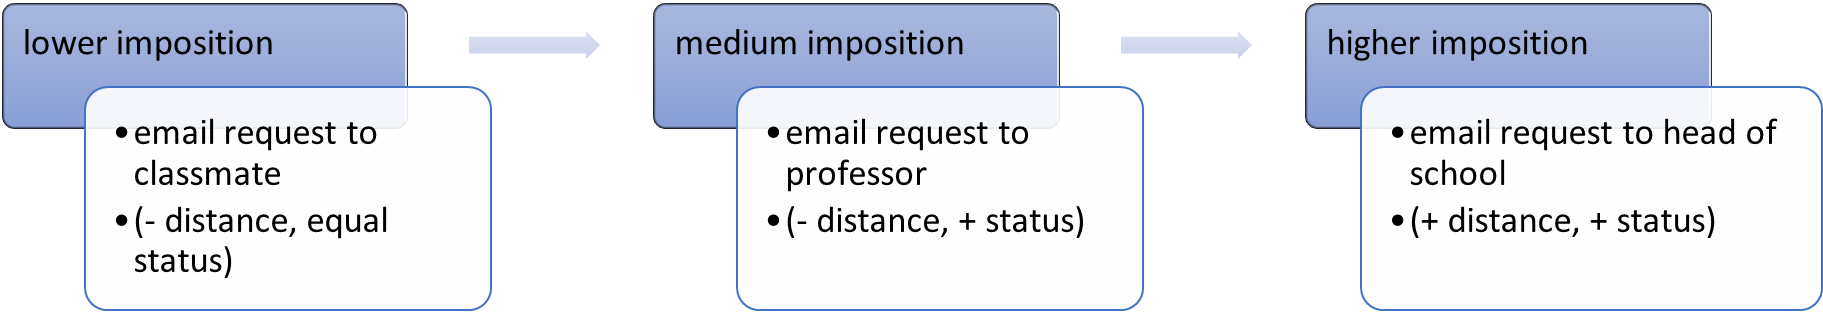 Level of imposition in email requests